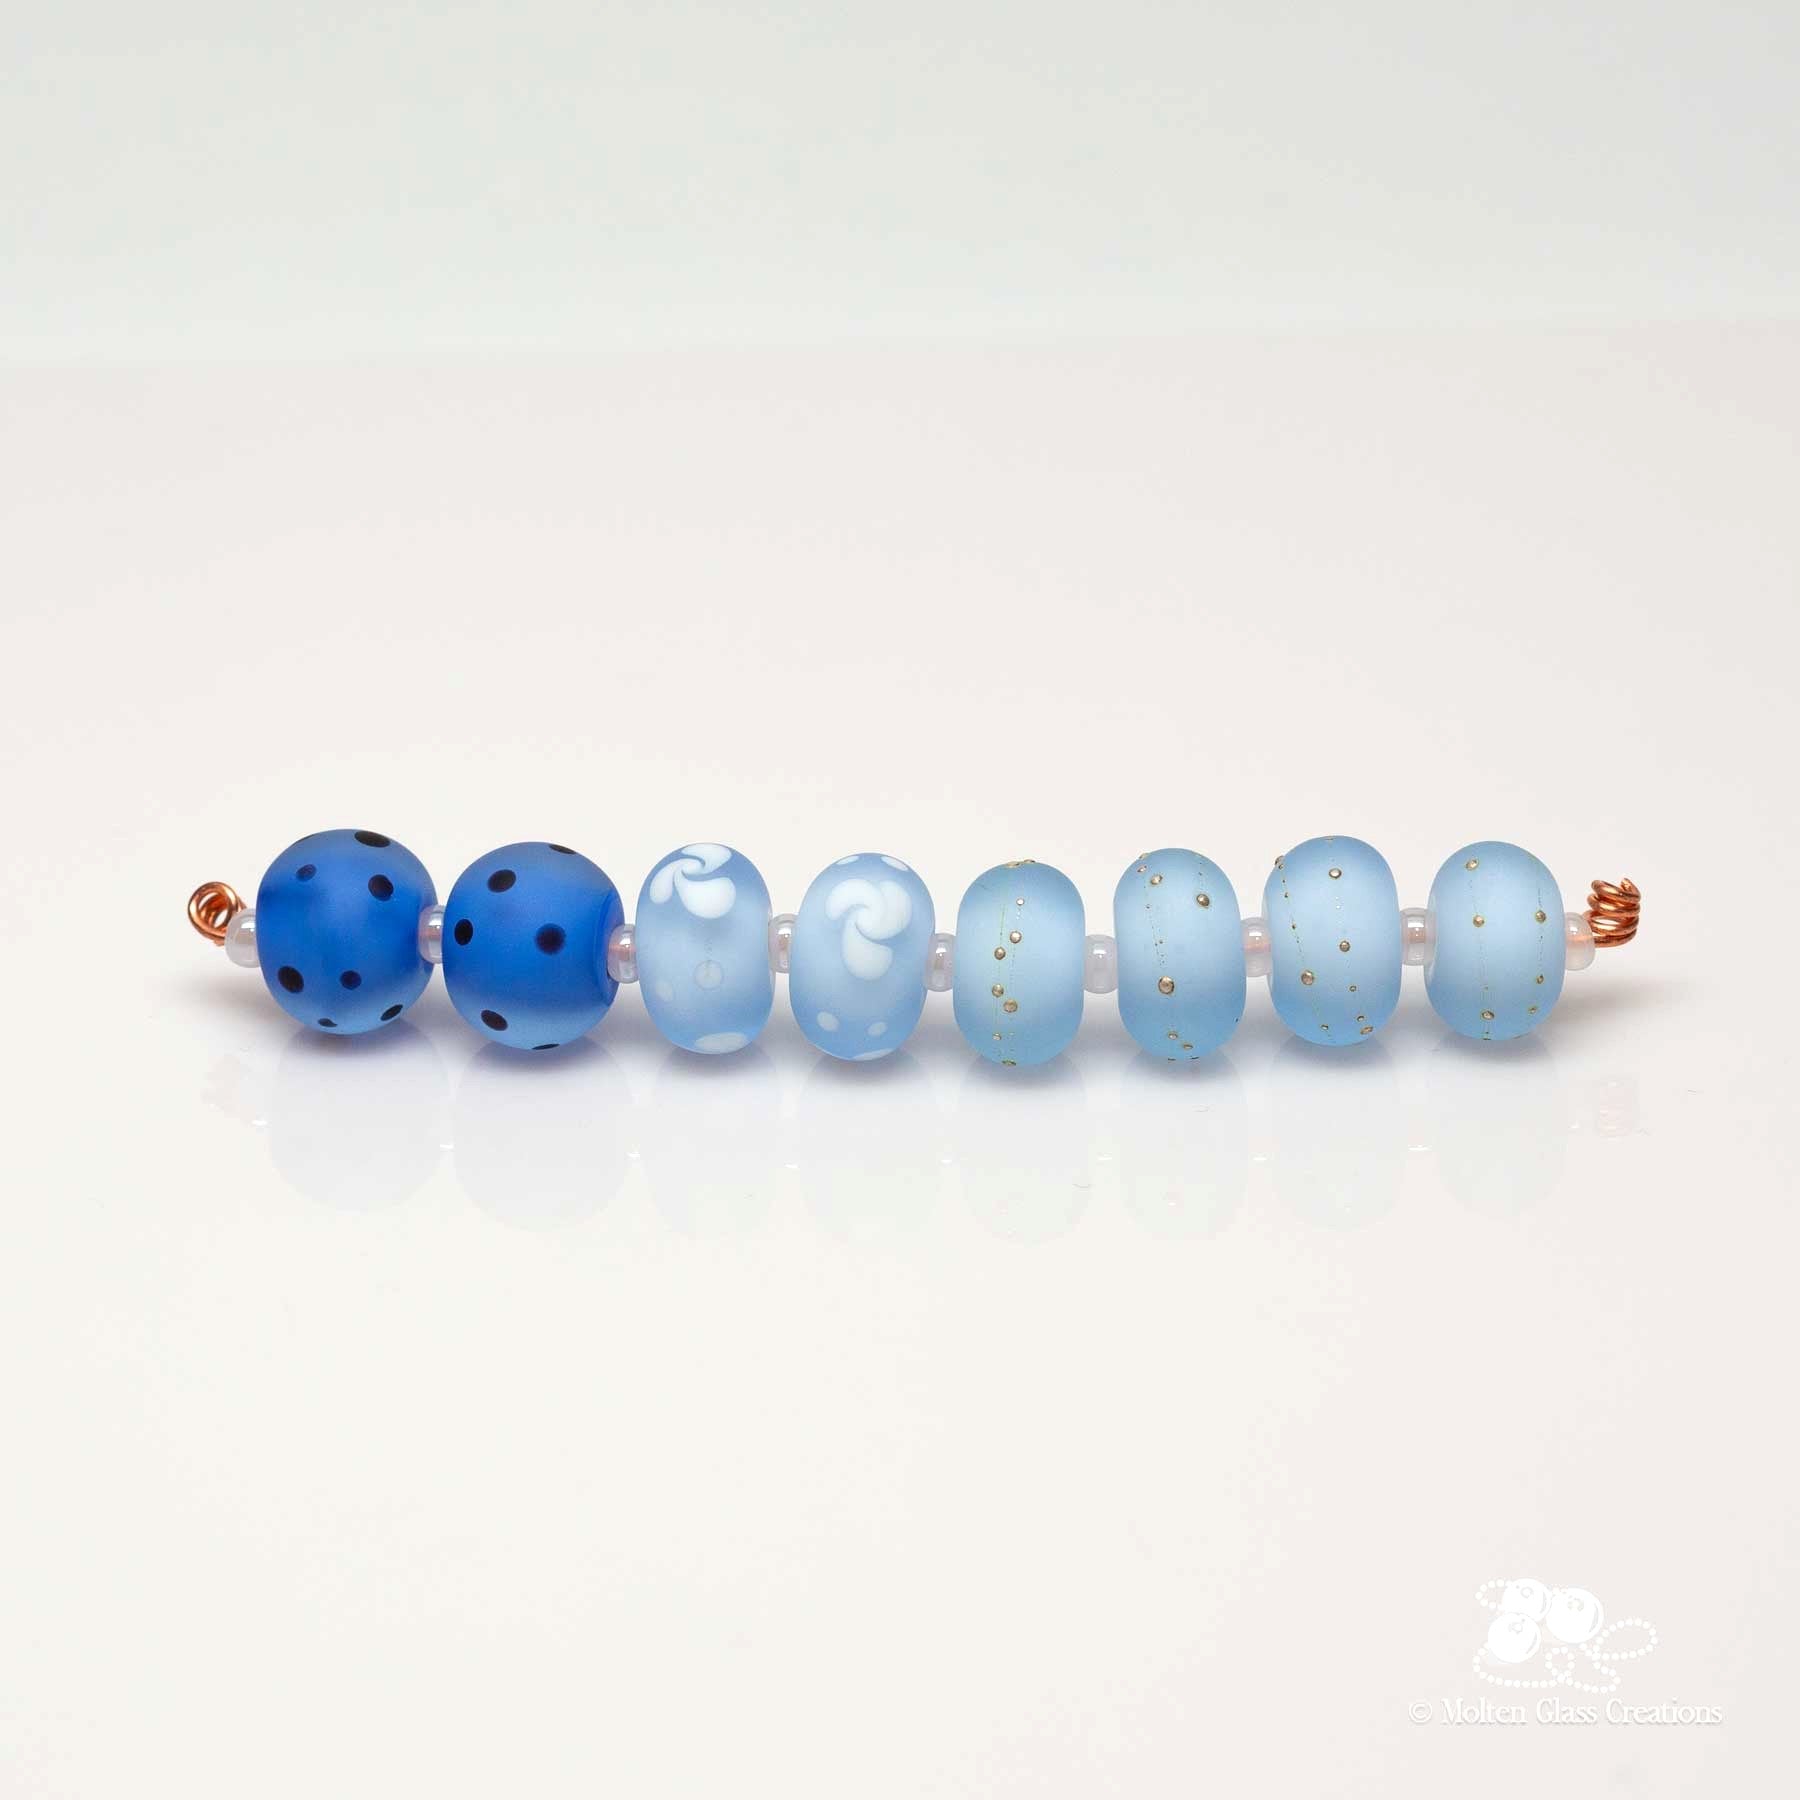 various shades of blue glass beads with a matt finish